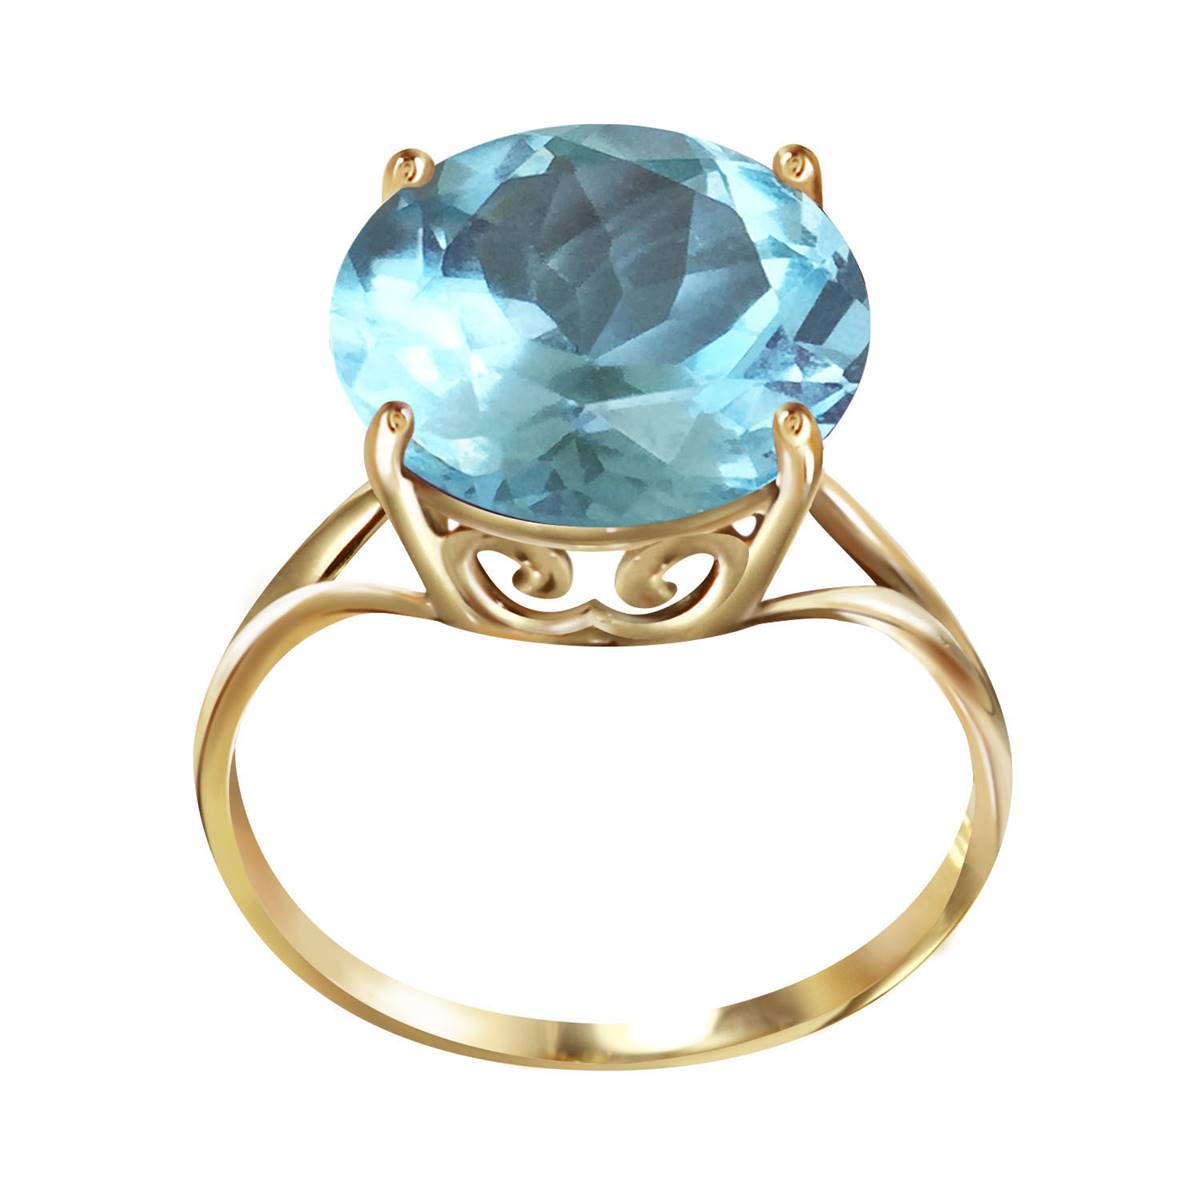 14K Solid Yellow Gold 12.0 mm Round Blue Topaz Ring